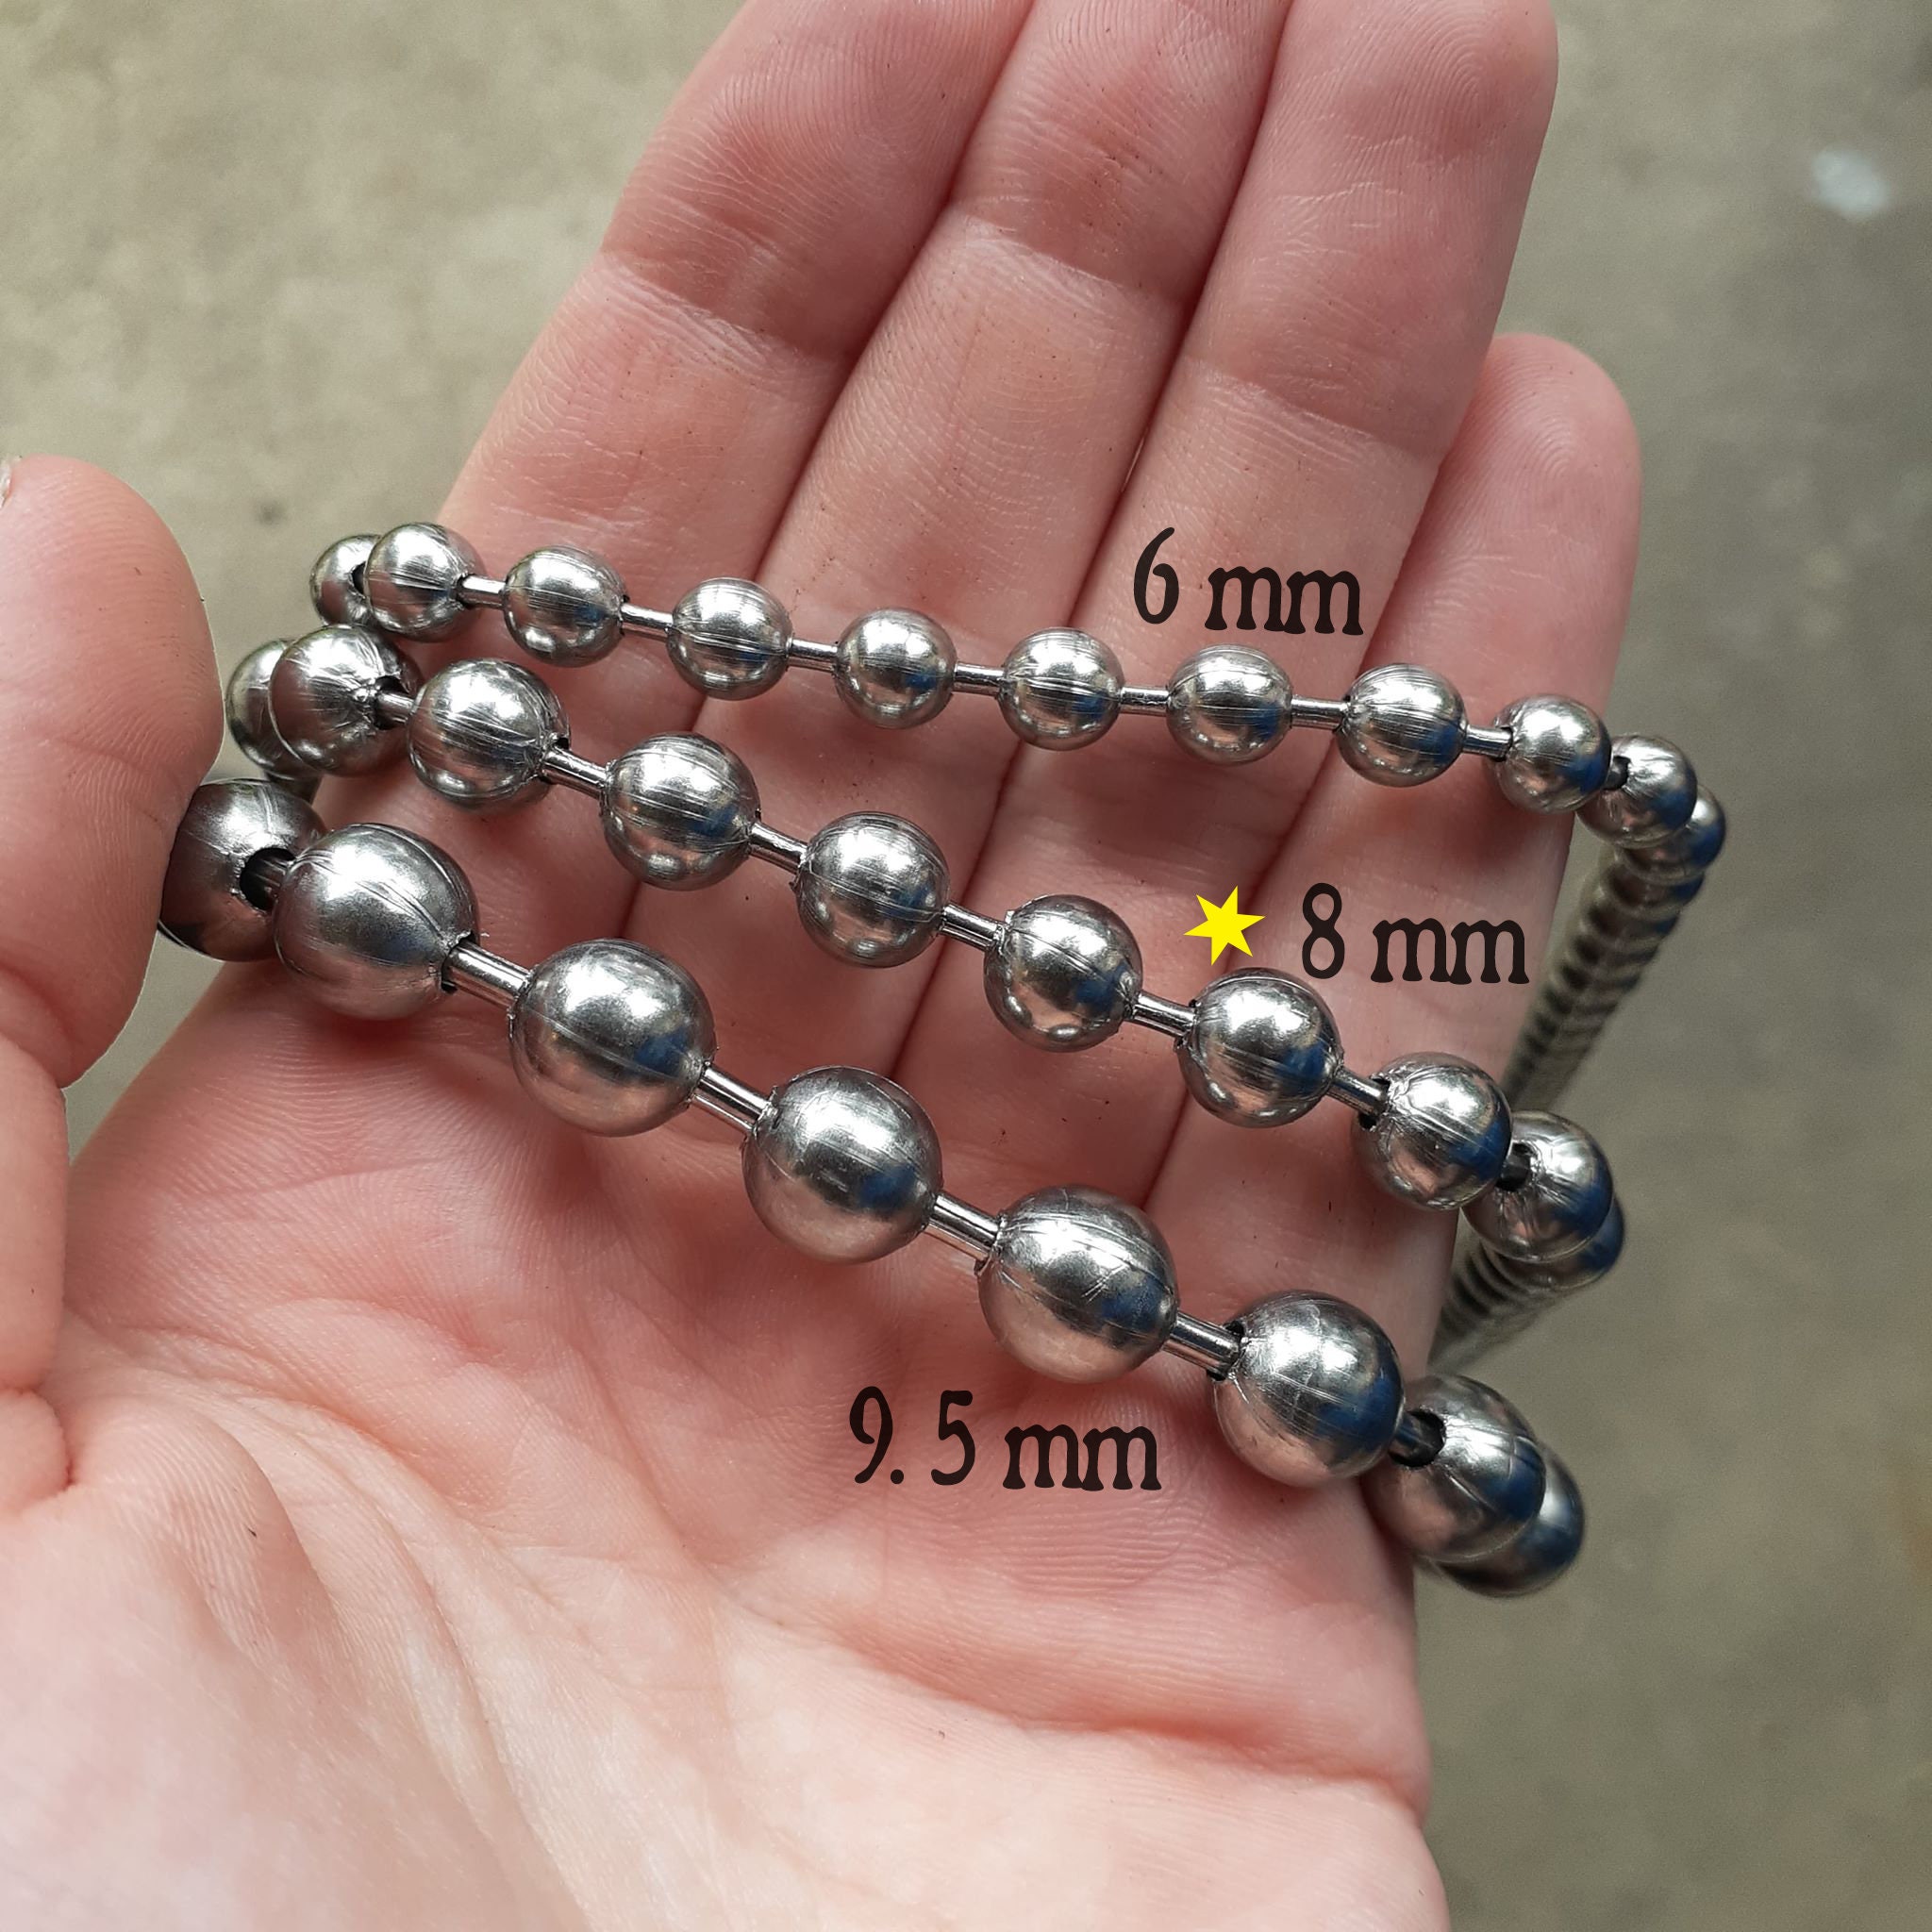 Simple Gold Color Stainless Steel 4/6/8mm Wide Beads Bracelet for Men,Basic  Ball Chain Bracelet Stretchable Wristband Jewelry